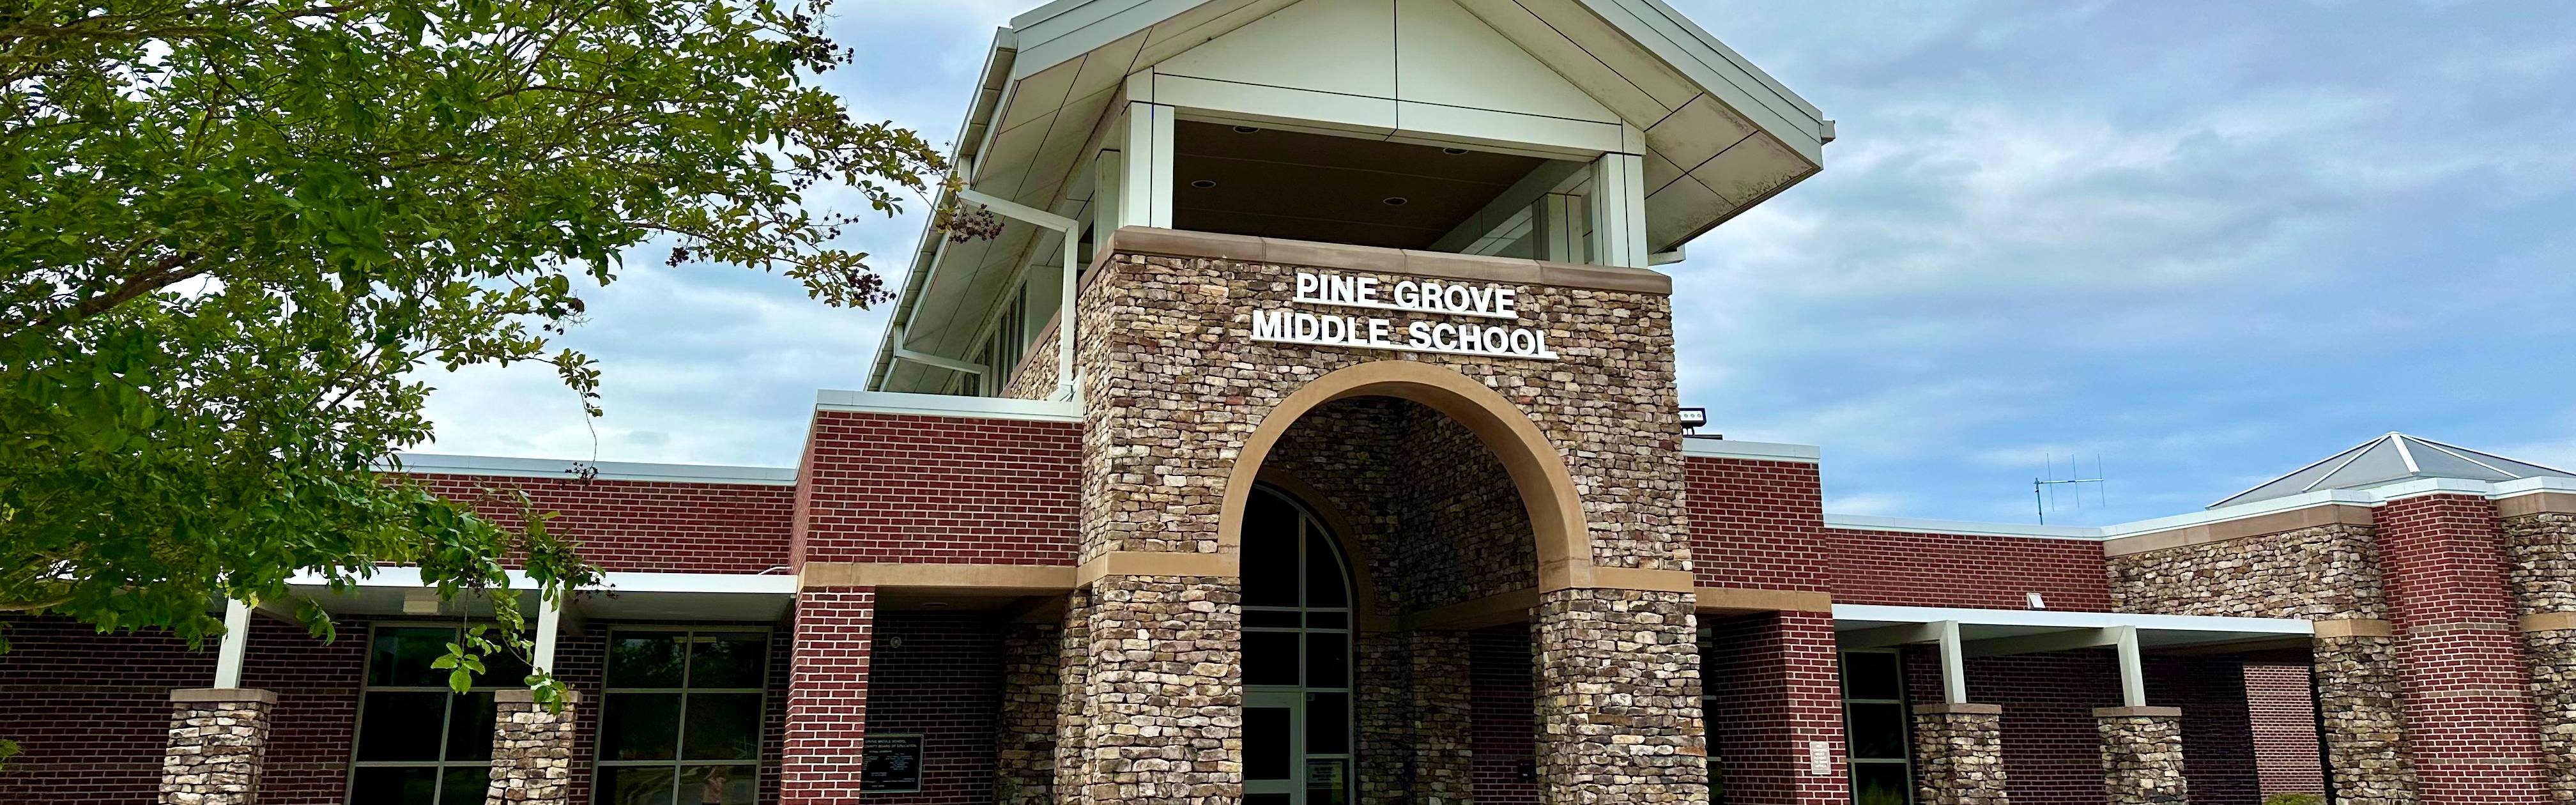 Front of Pine Grove Middle School building